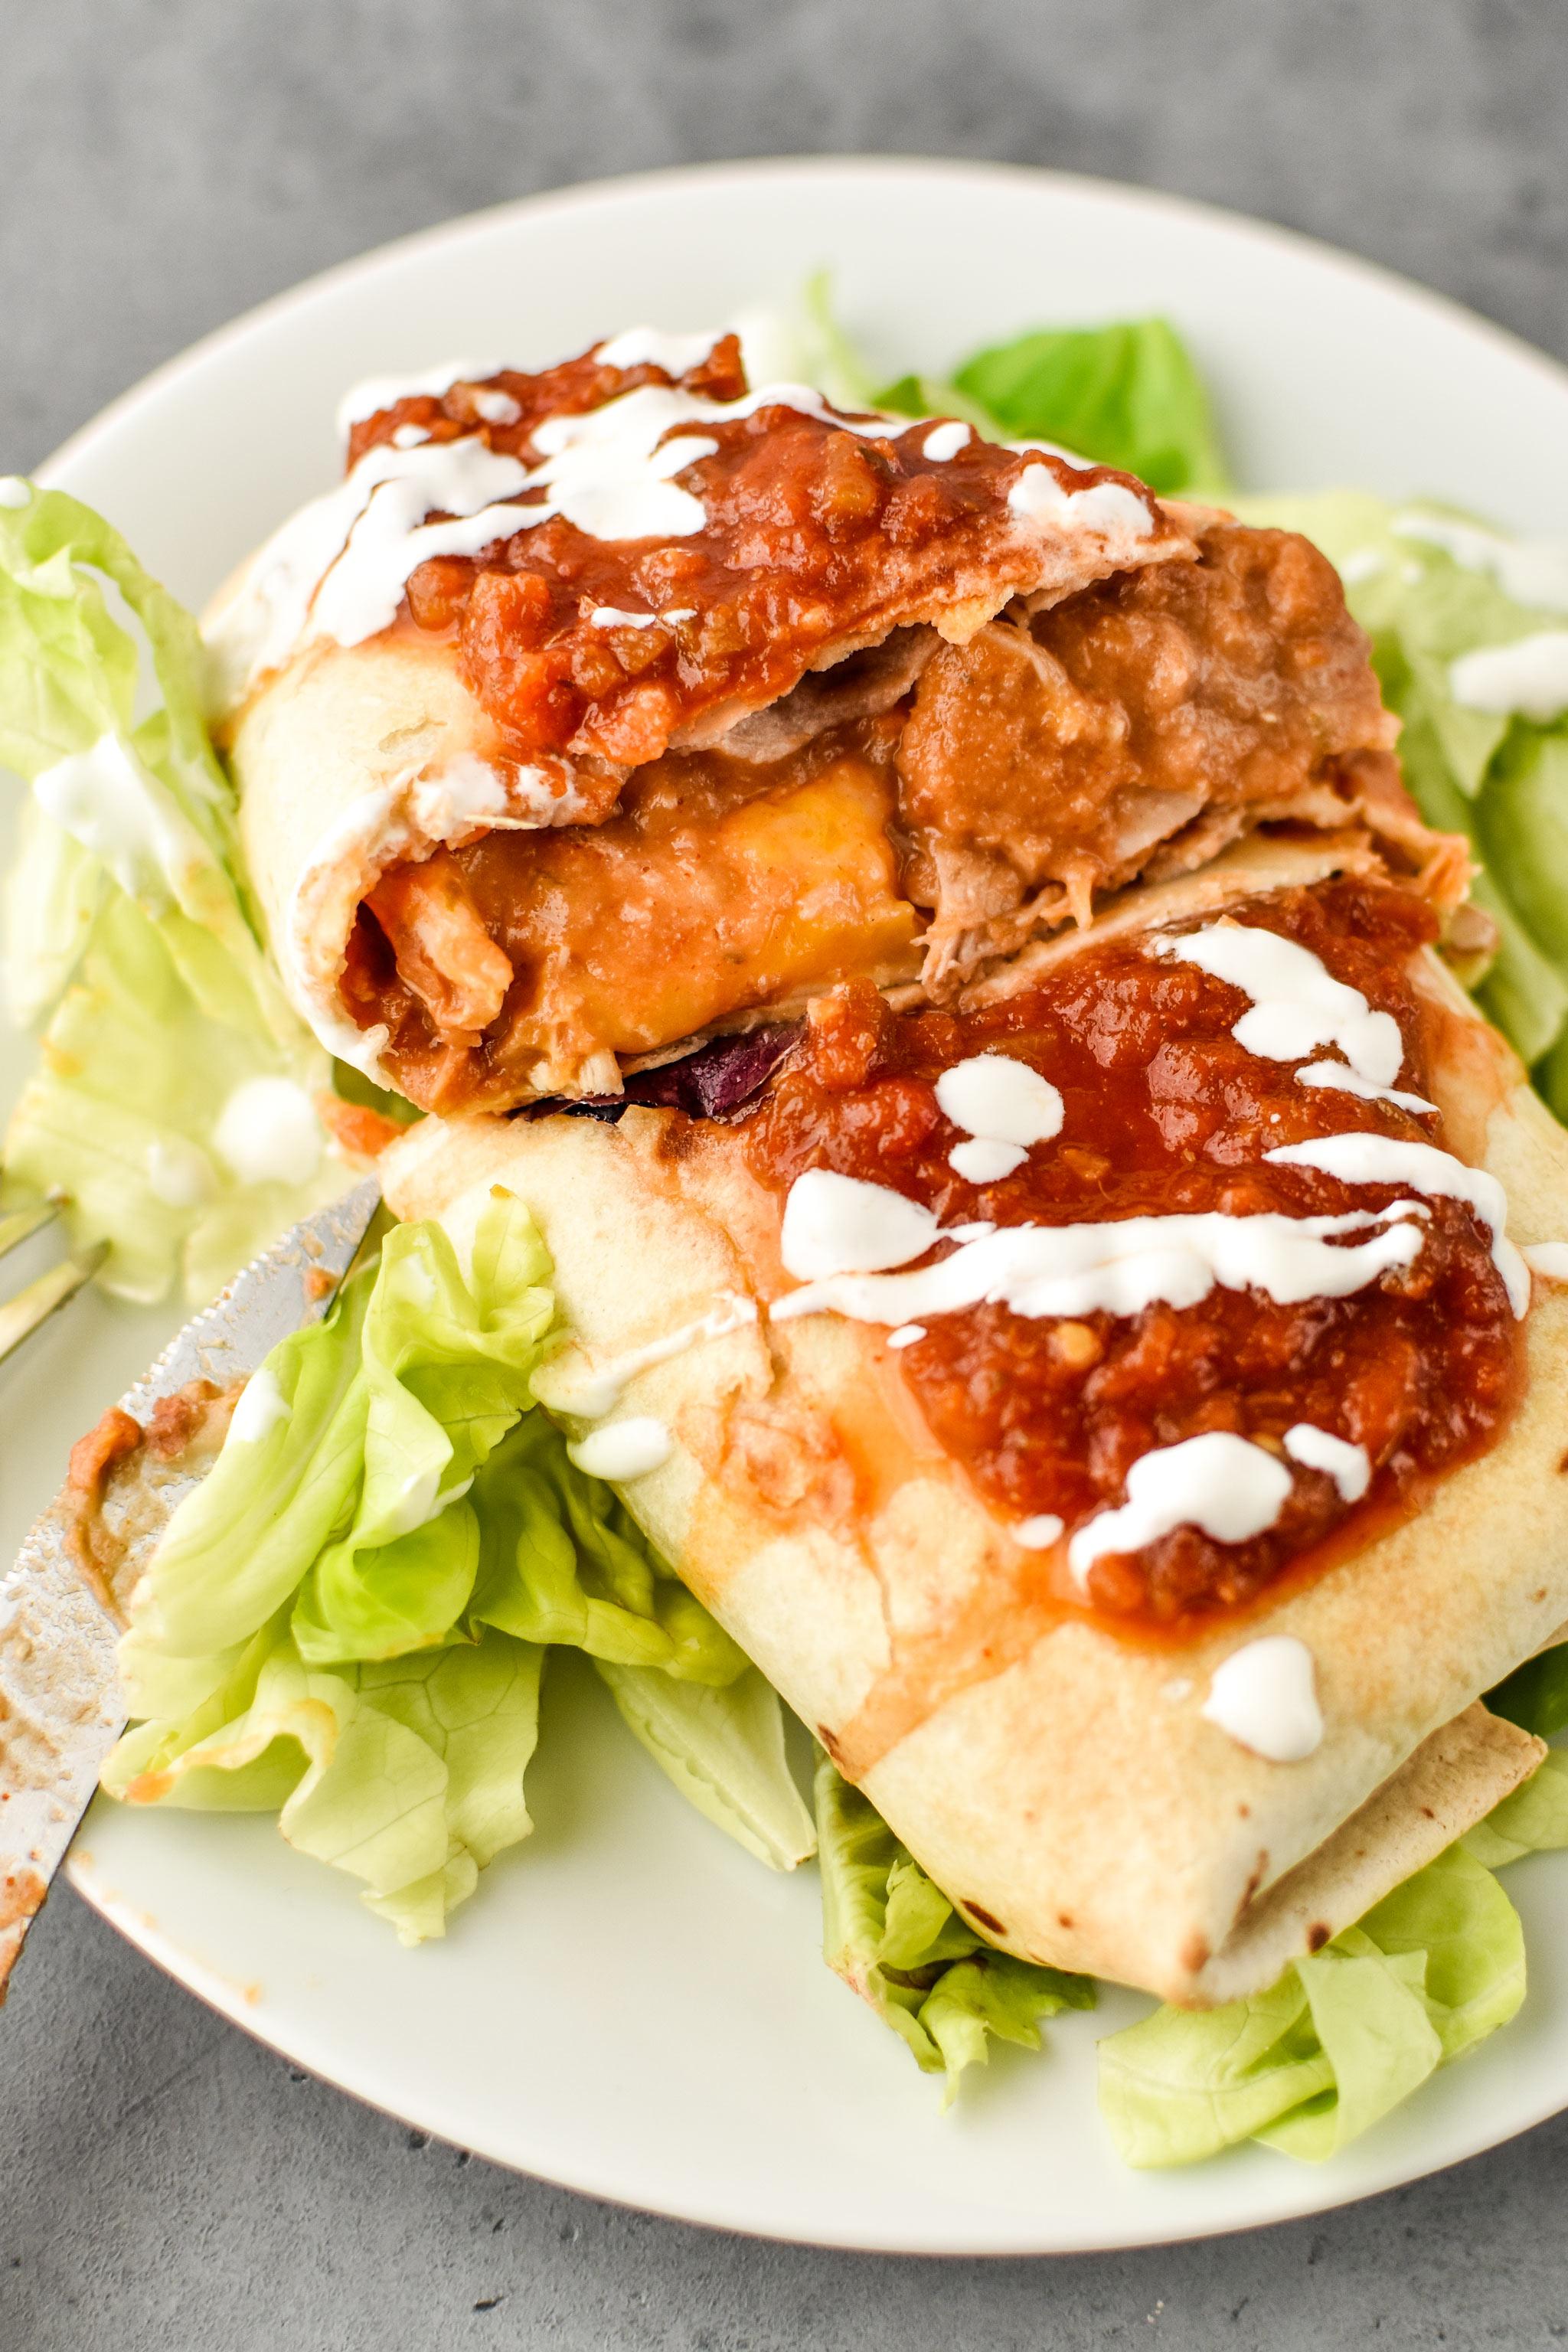 delicious chimichangas - how to make chimichangas in an air fryer